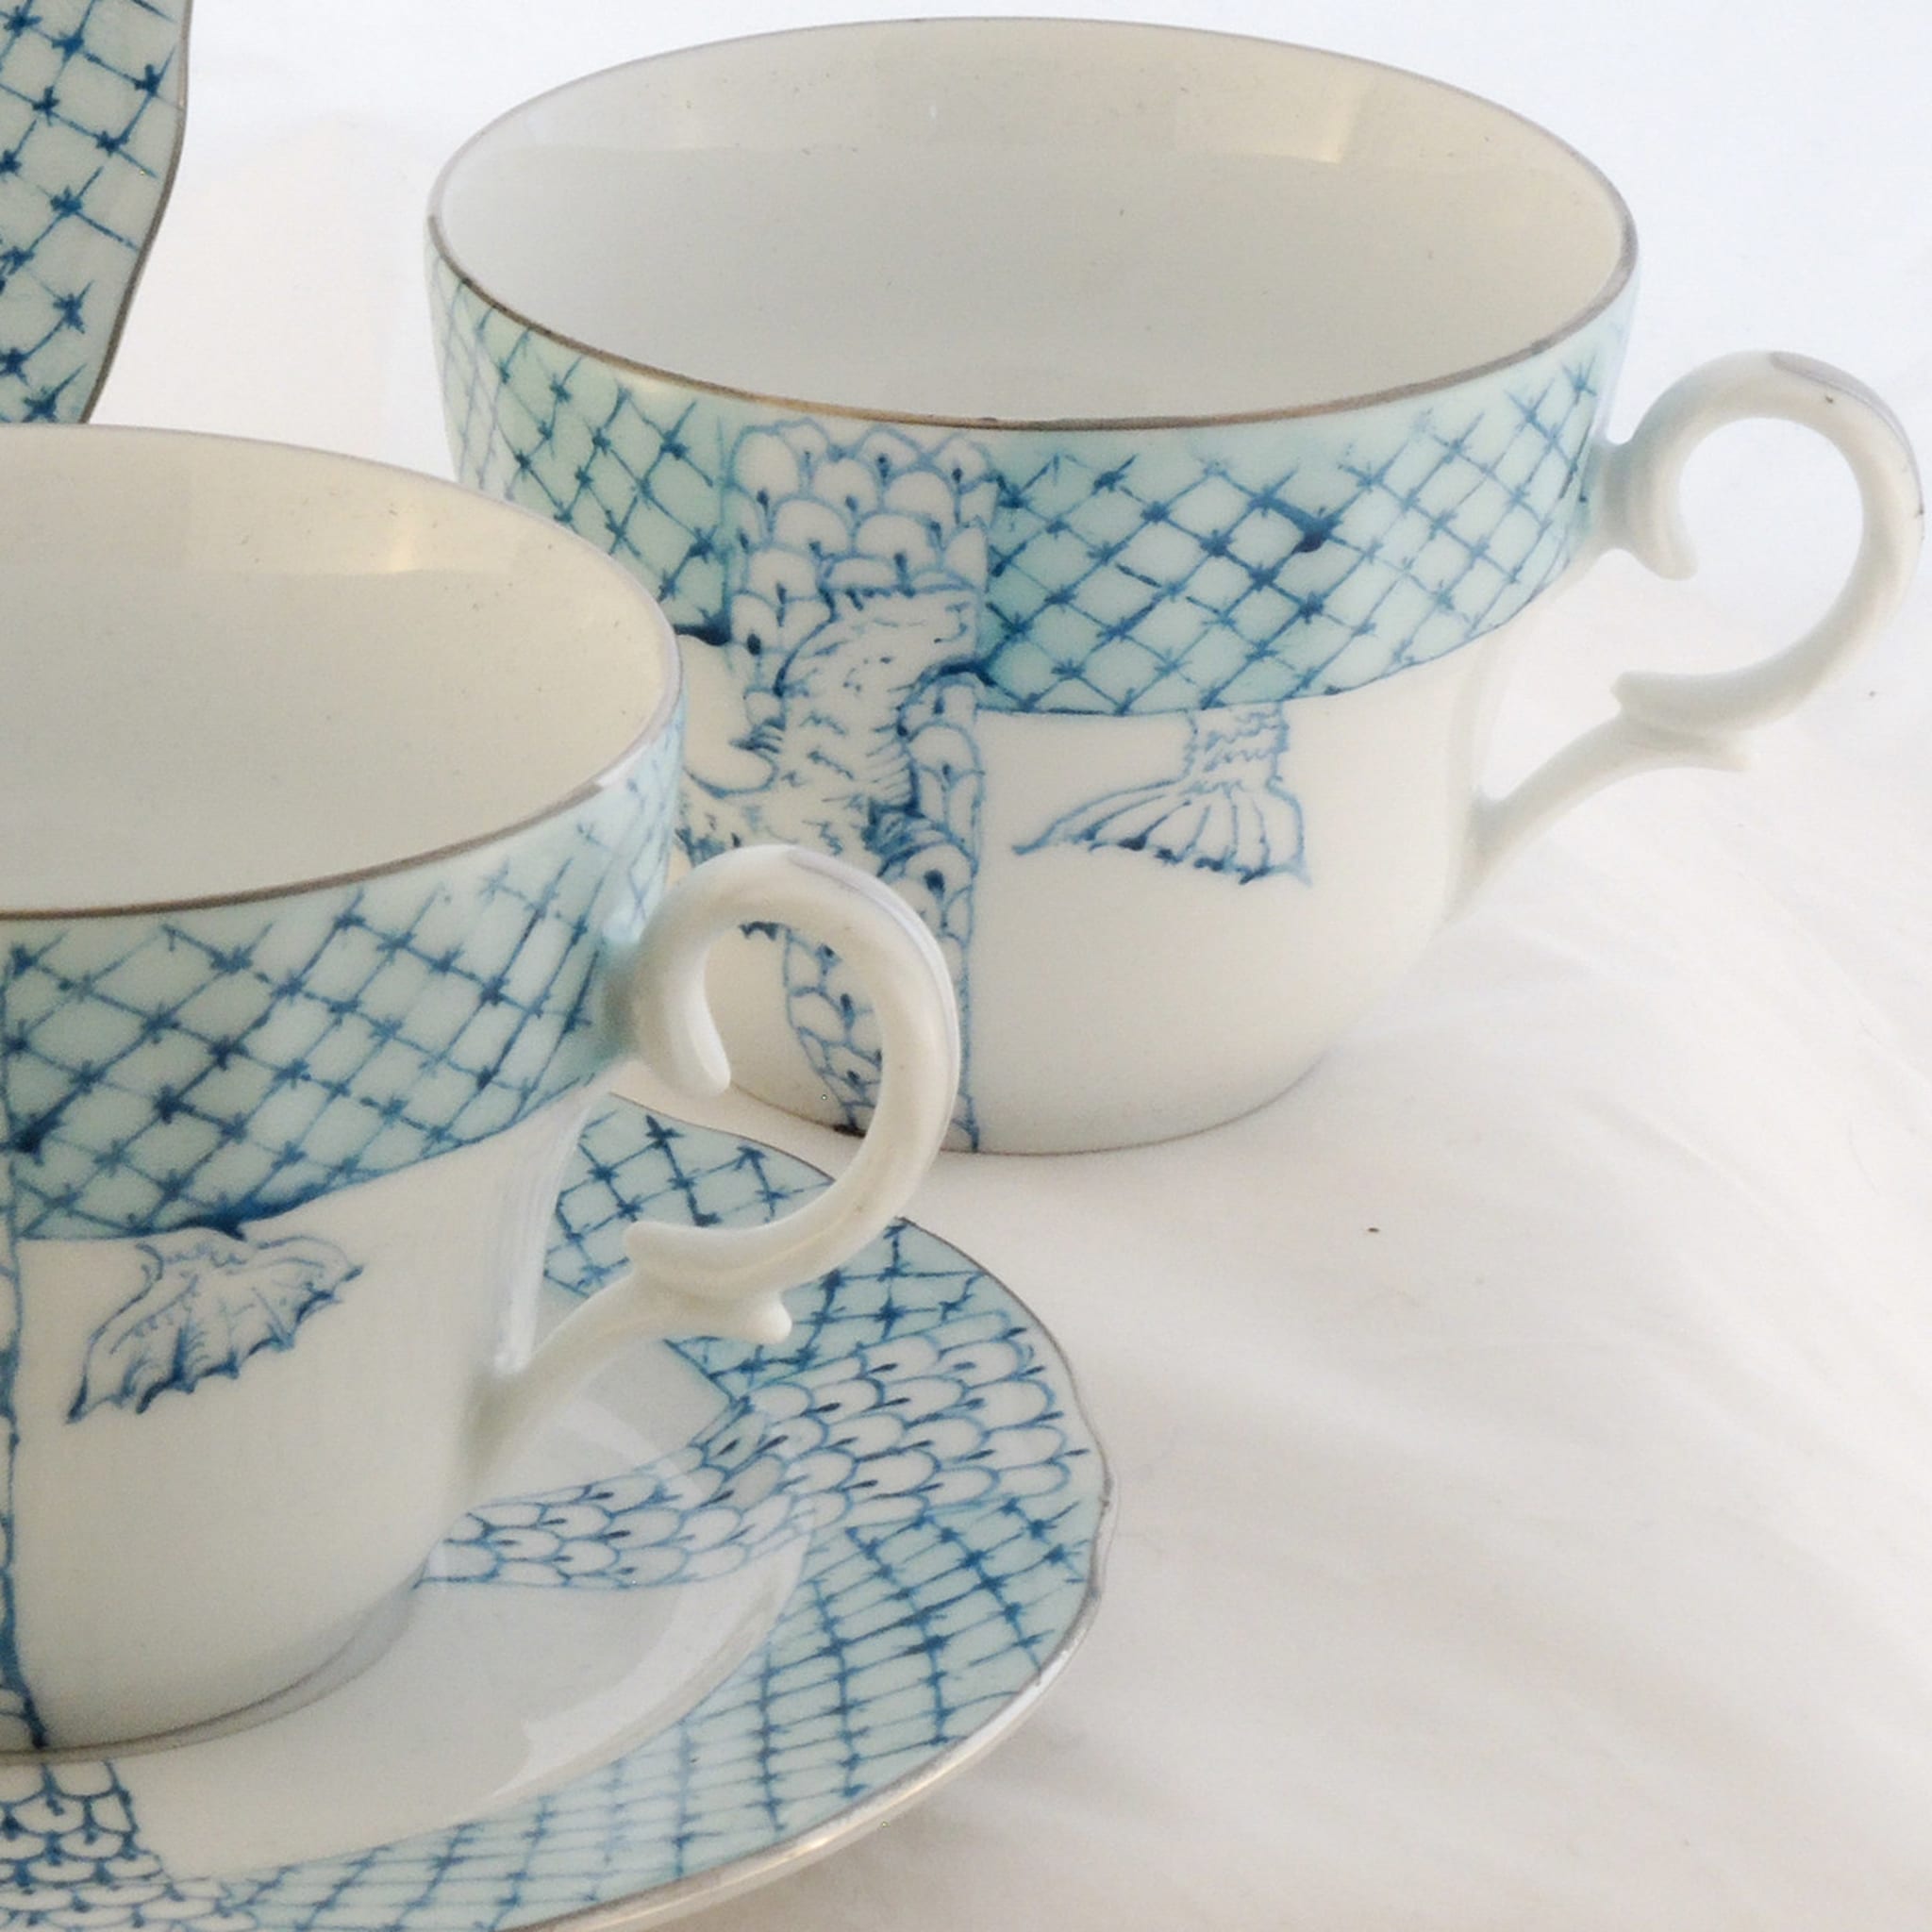 Turquoise Dragon 2 Cups and Saucer Set - Alternative view 1